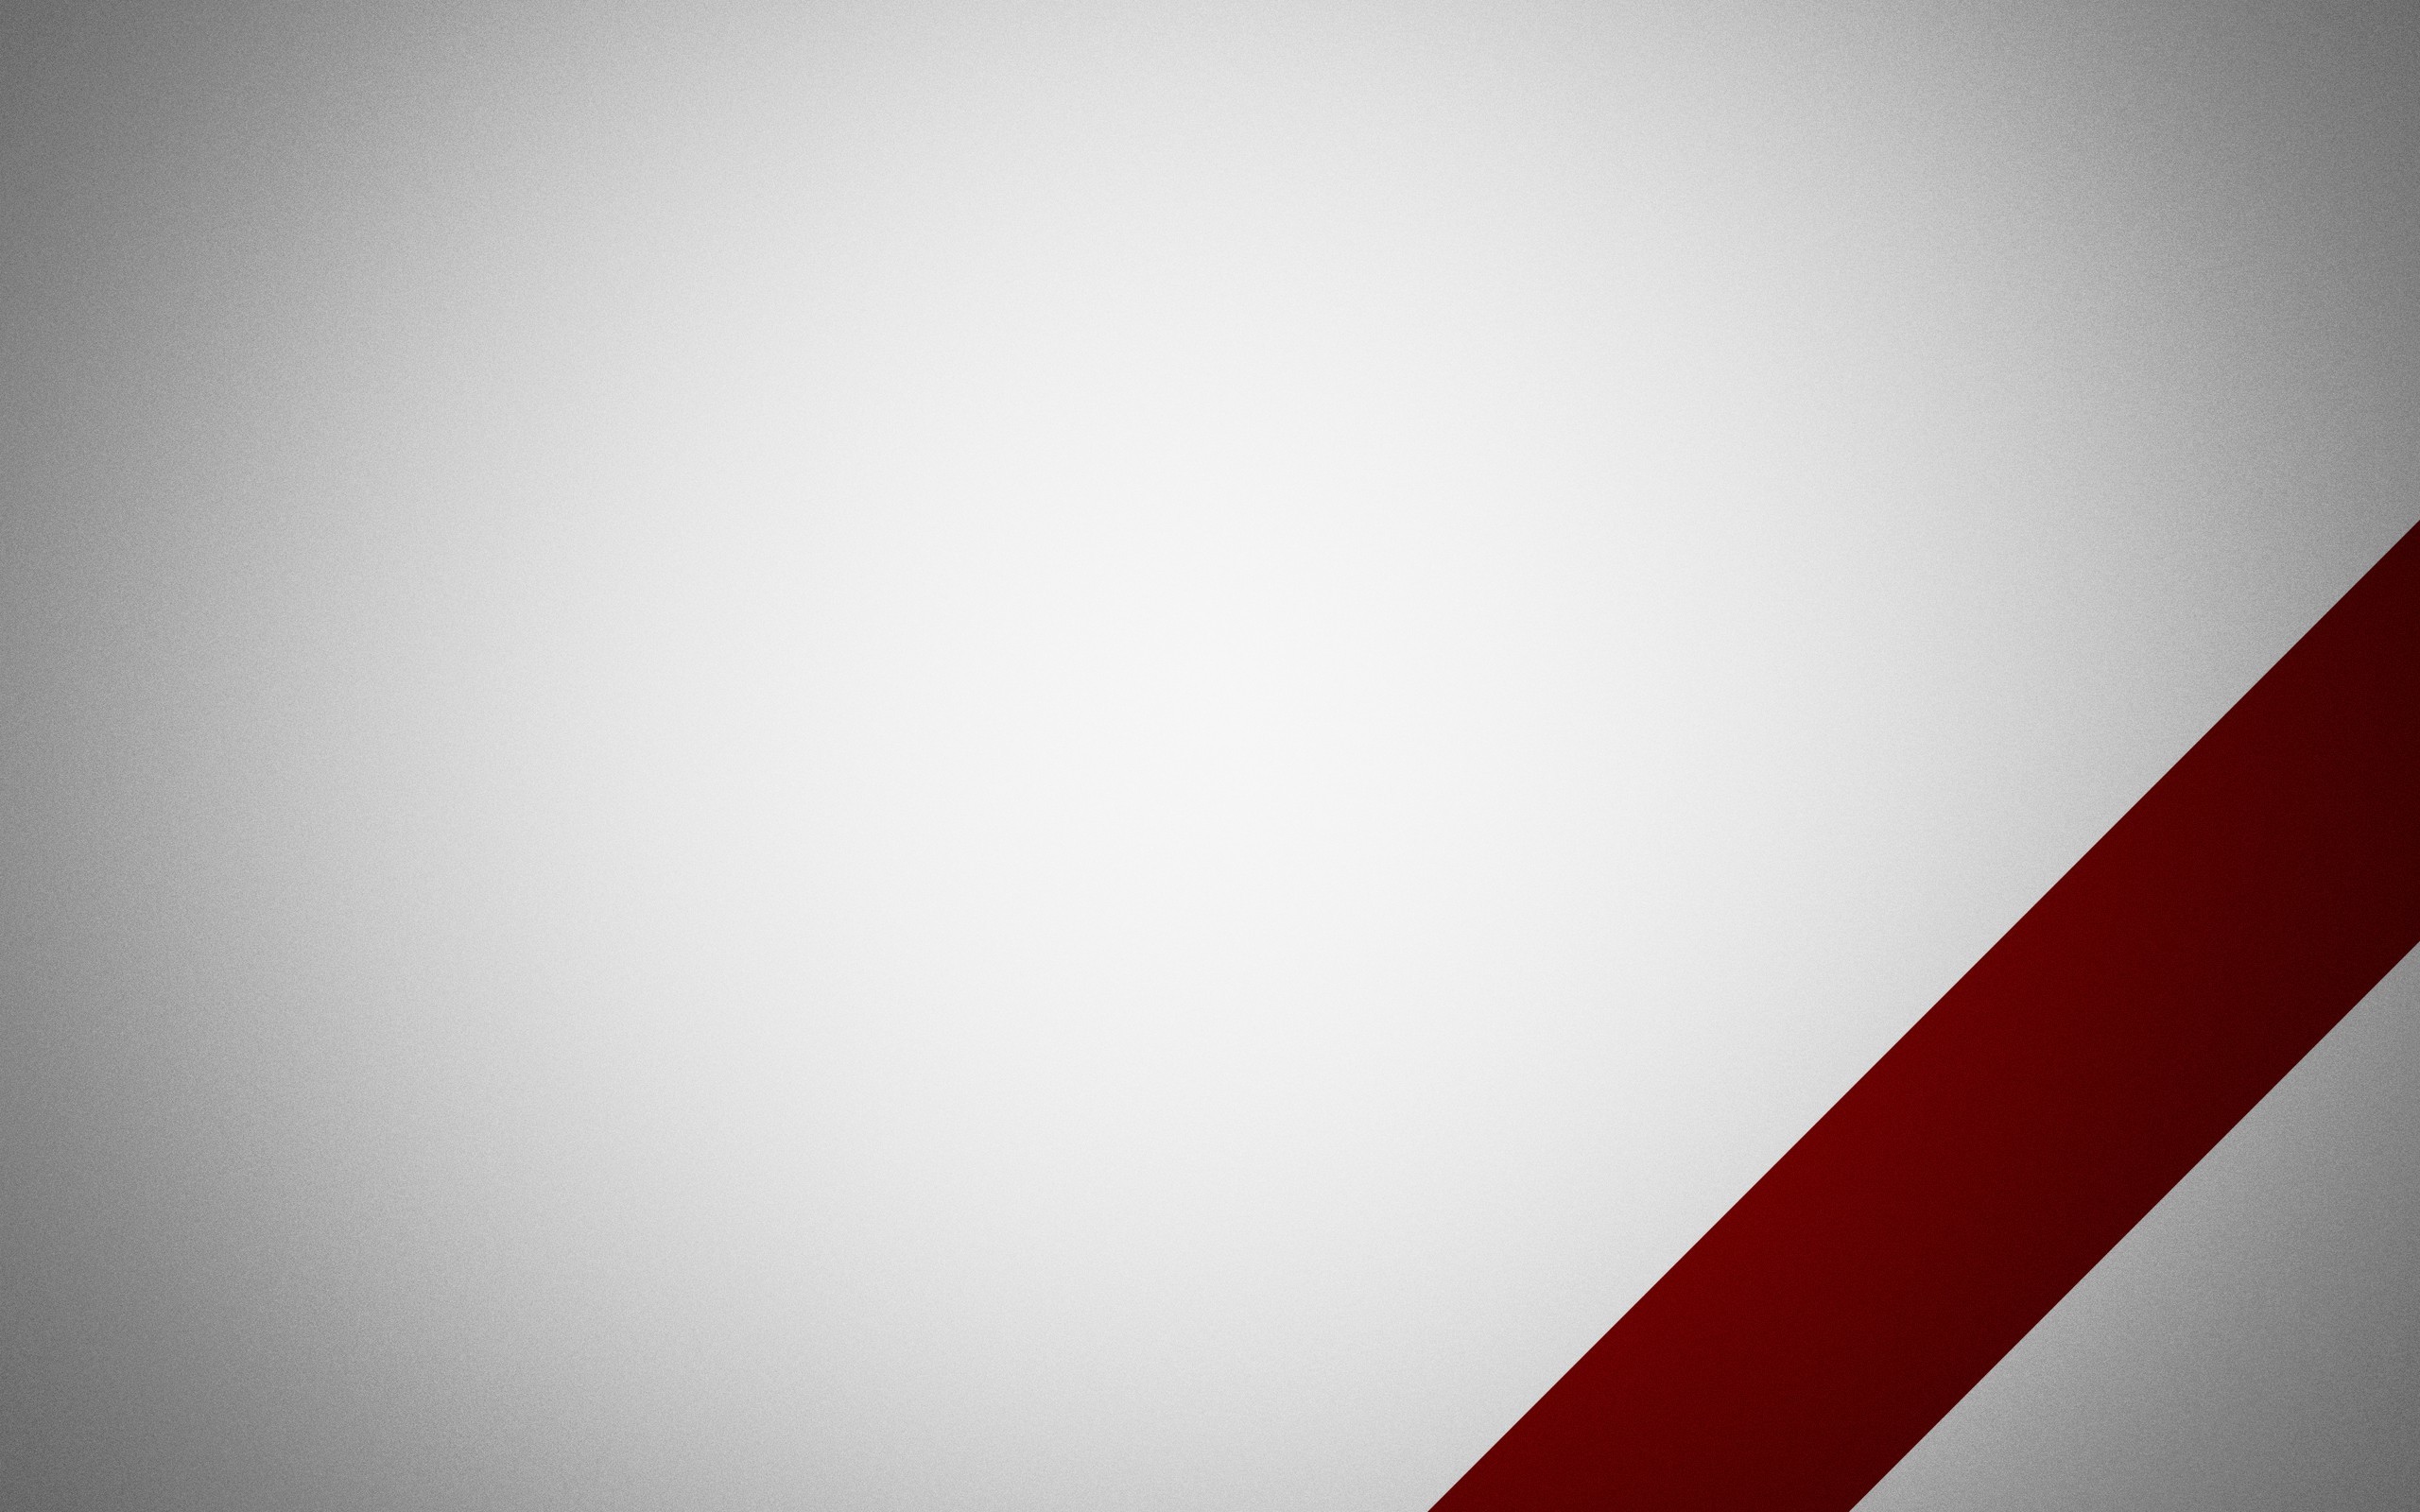 2560x1600 Red And White Wallpaper Backgrounds - WallpaperSafari